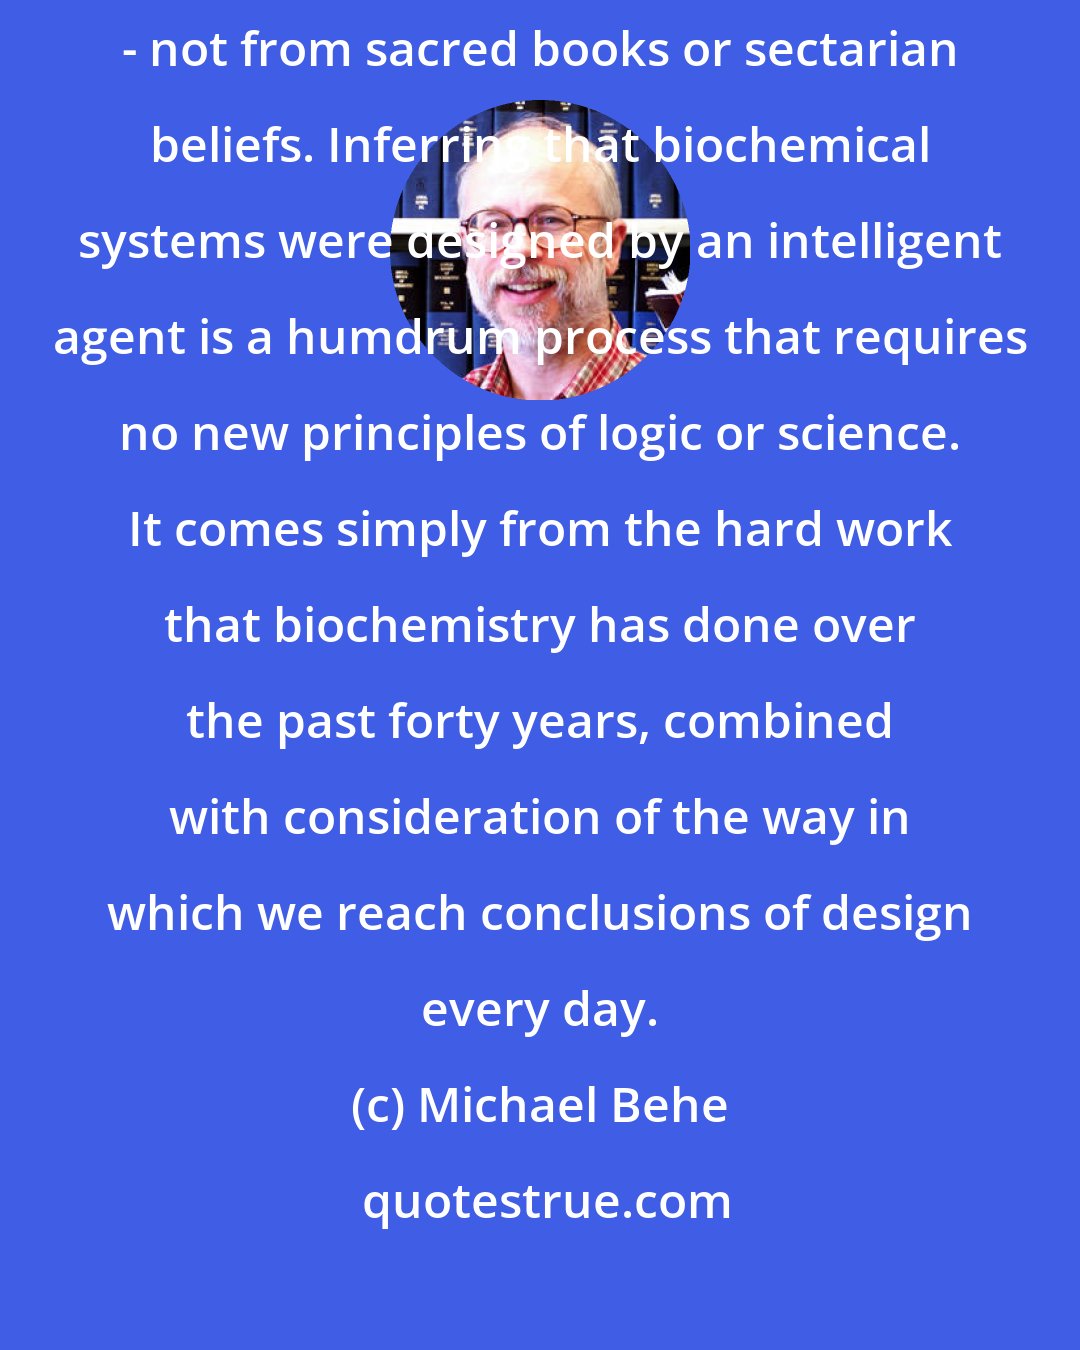 Michael Behe: The conclusion of intelligent design flows naturally from the data itself - not from sacred books or sectarian beliefs. Inferring that biochemical systems were designed by an intelligent agent is a humdrum process that requires no new principles of logic or science. It comes simply from the hard work that biochemistry has done over the past forty years, combined with consideration of the way in which we reach conclusions of design every day.